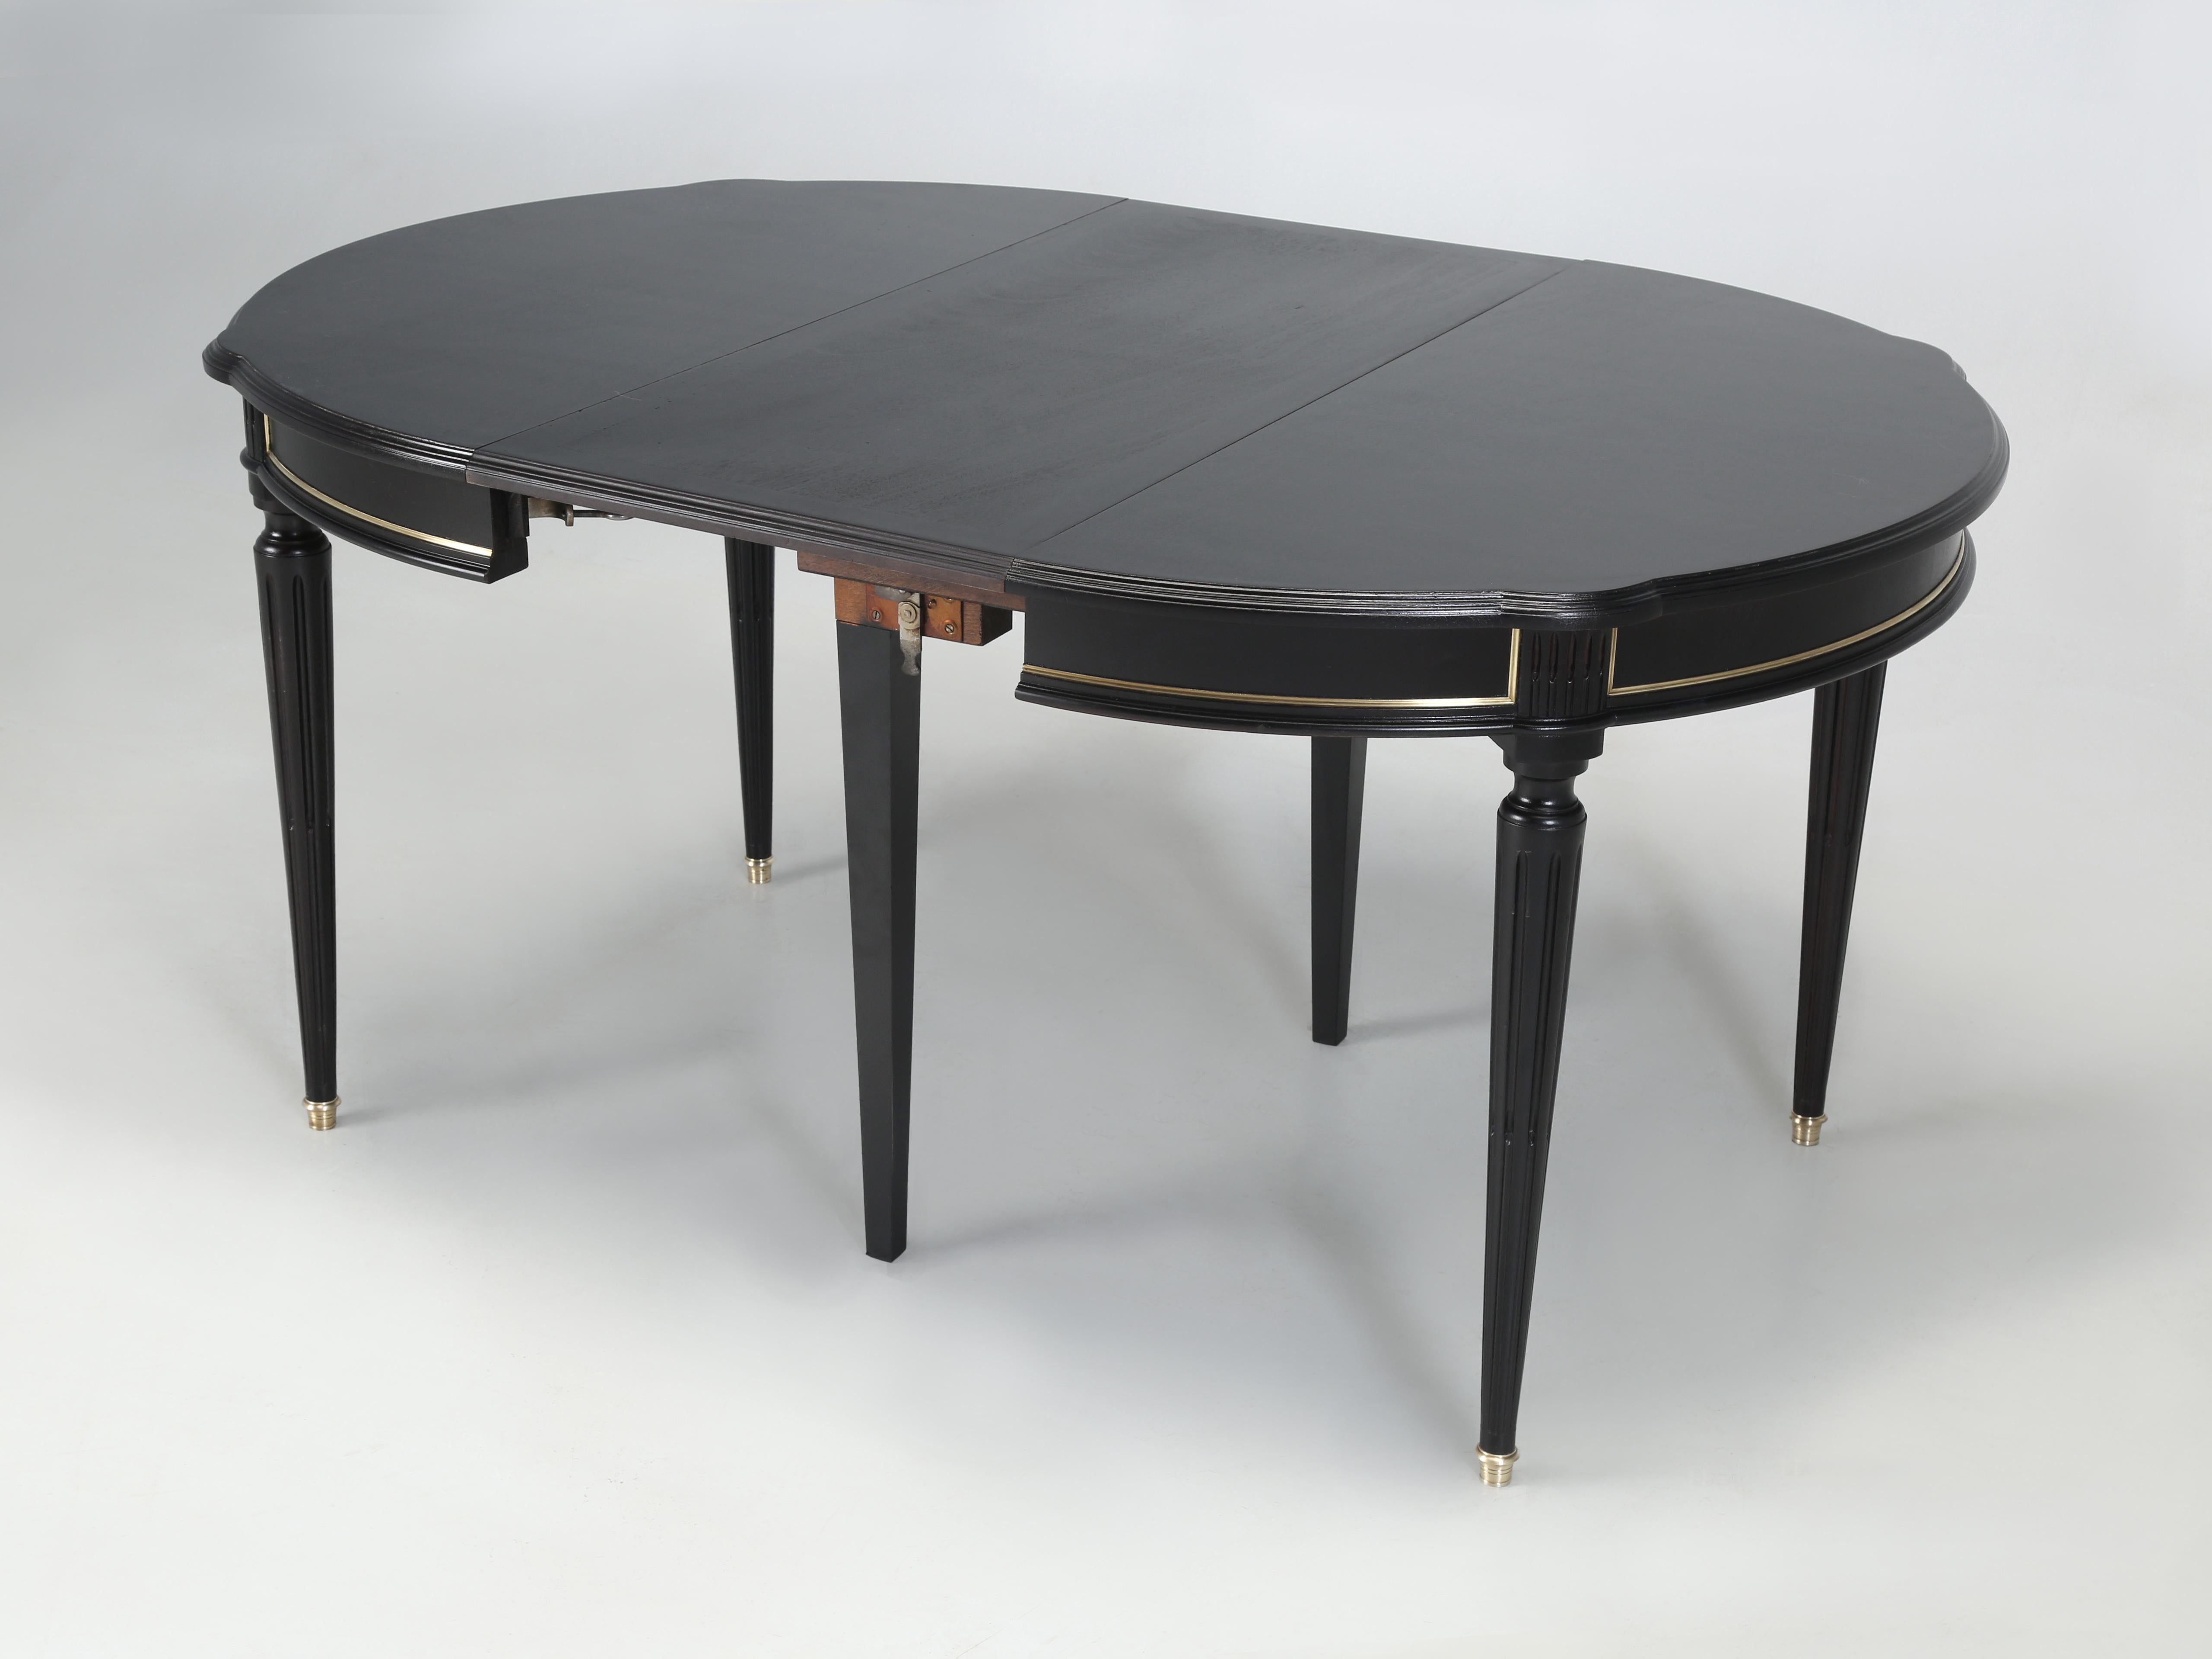 French Louis XVI Style Ebonized Mahogany Round Dining Table, with (3) large ebonized leaves fresh out of our Old Plank Restoration department. The finishing department completely hand-stripped our mahogany dining table to the bare wood and applied